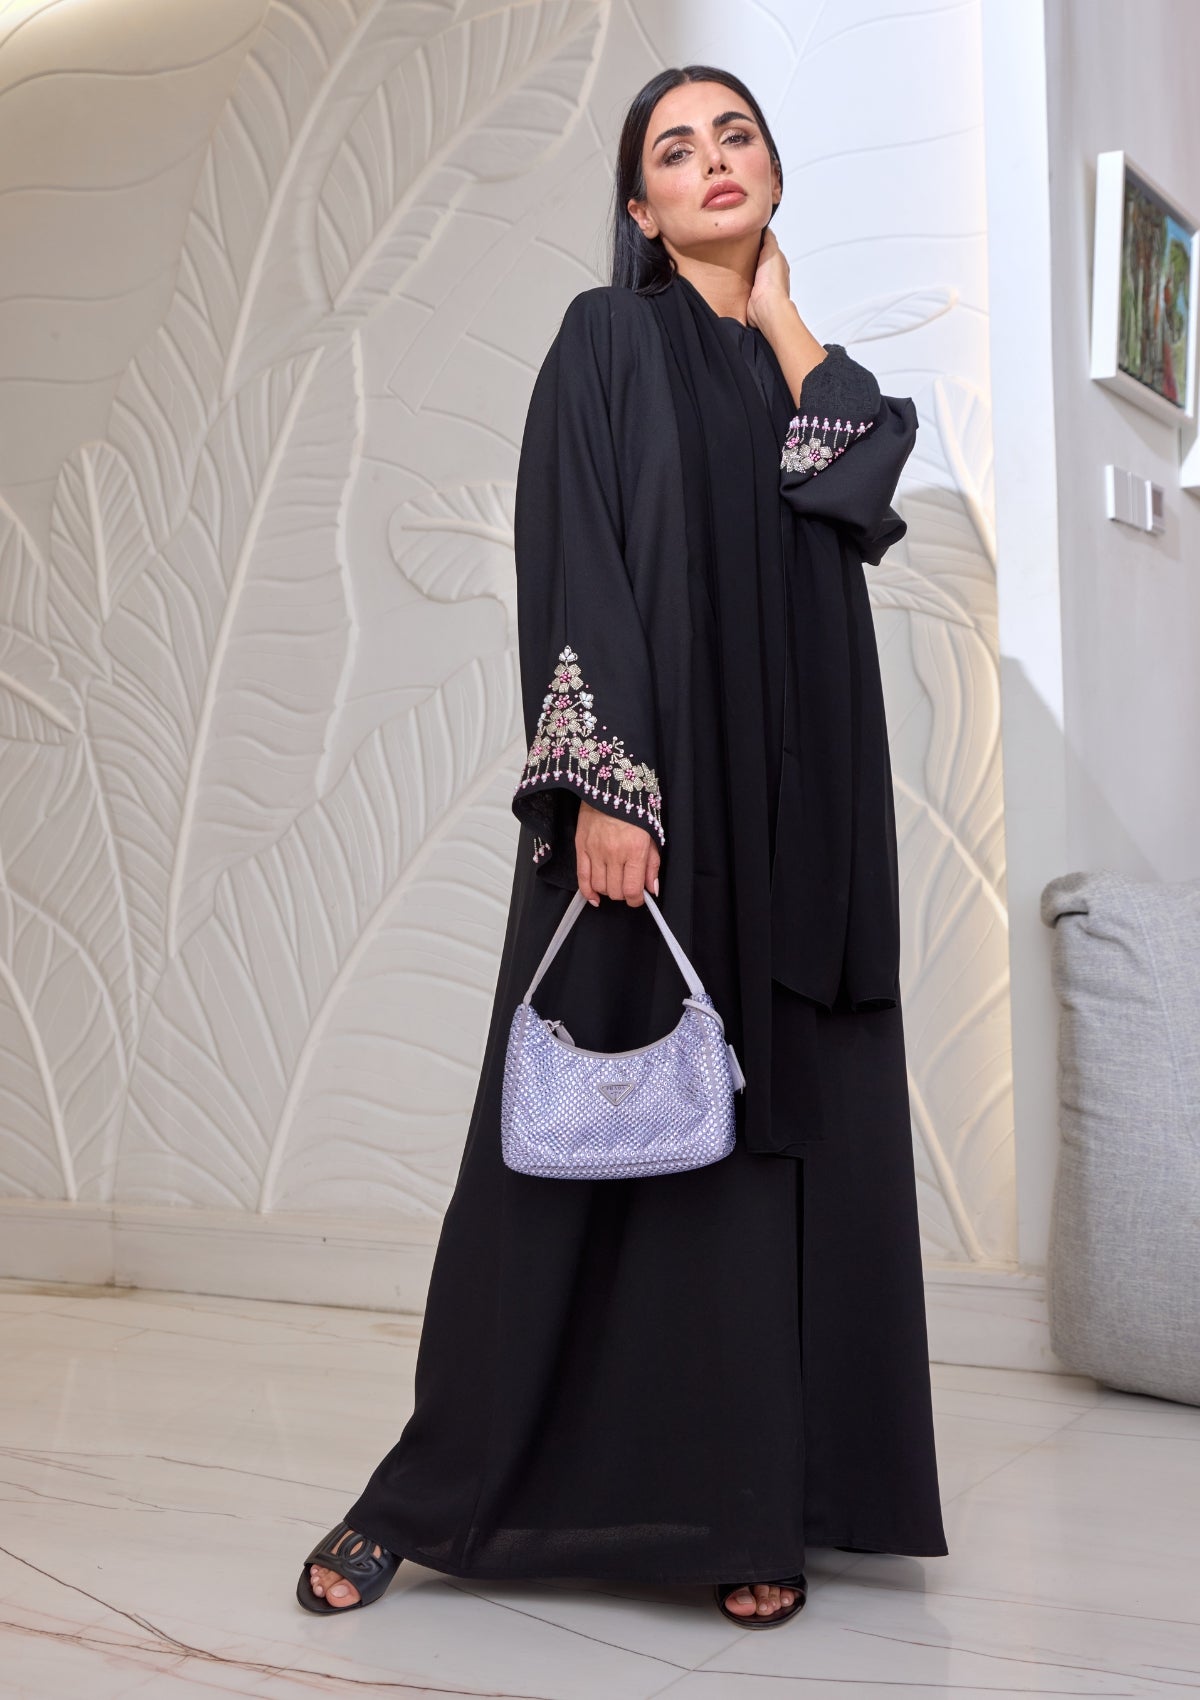 Black Abaya with Stone Embroidery on Sleeves